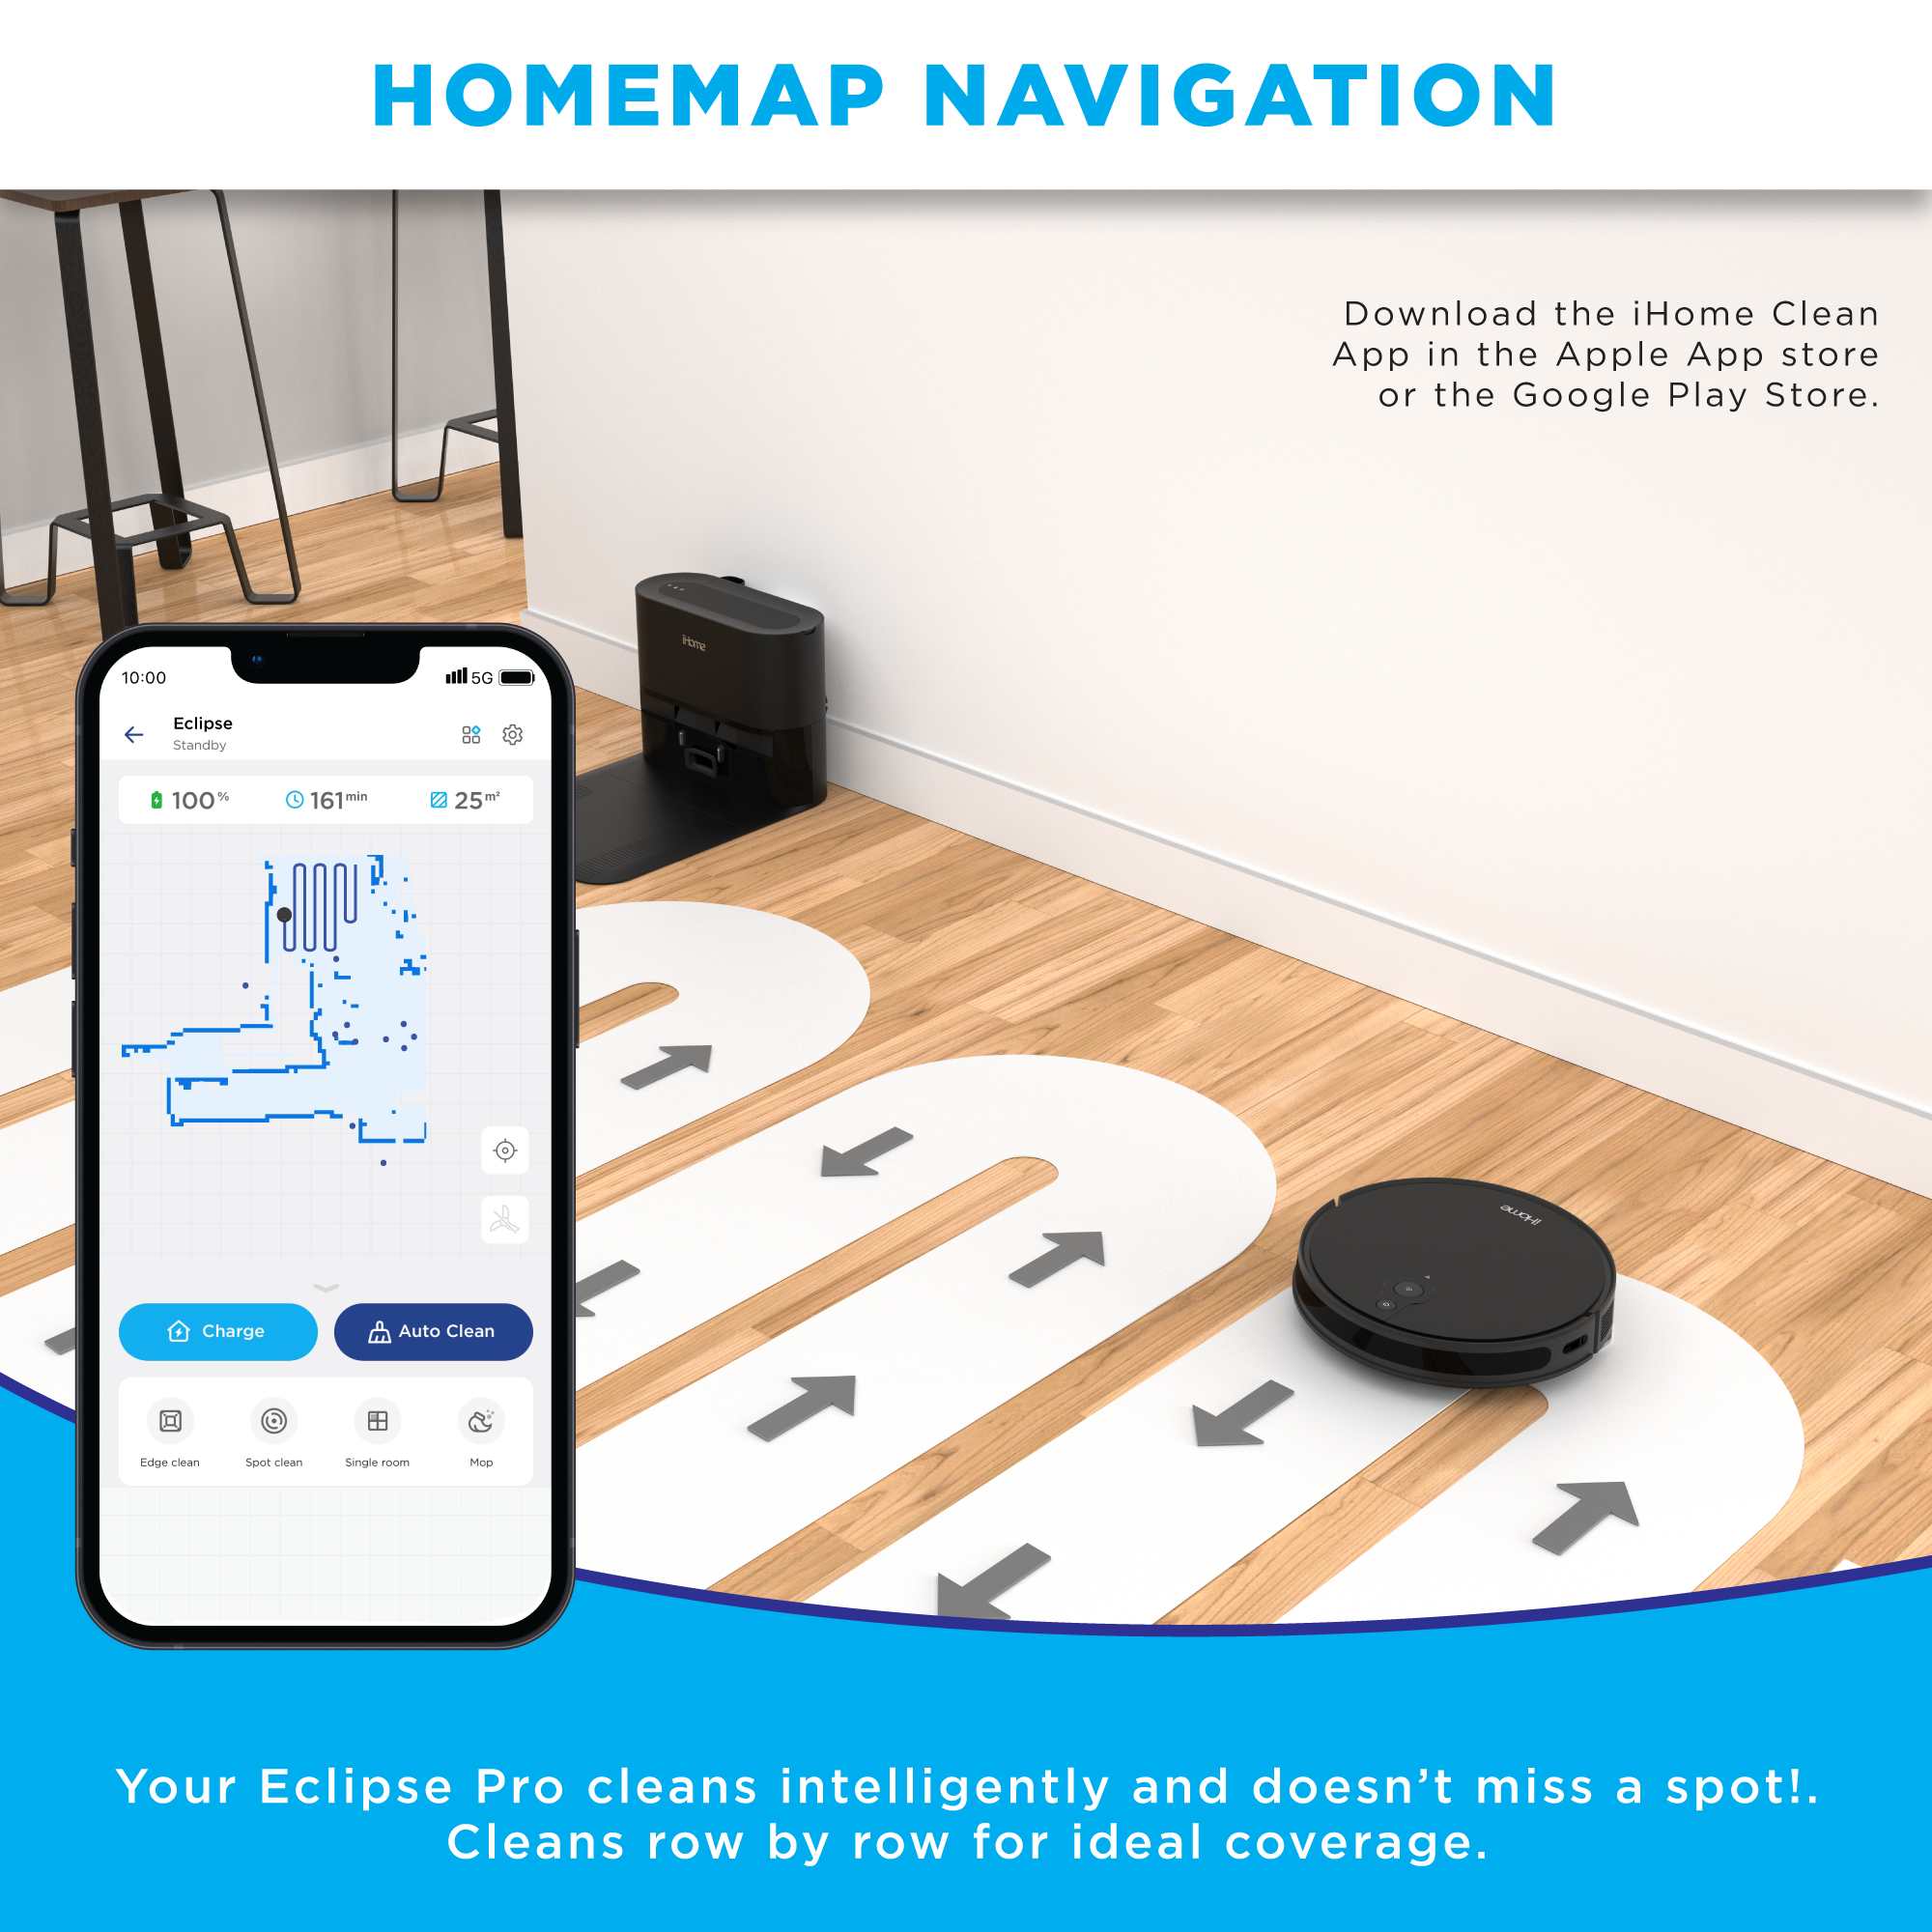 iHome AutoVac Eclipse Pro 3-in-1 Robot Vacuum and Vibrating Mop, Homemap Navigation - image 2 of 10